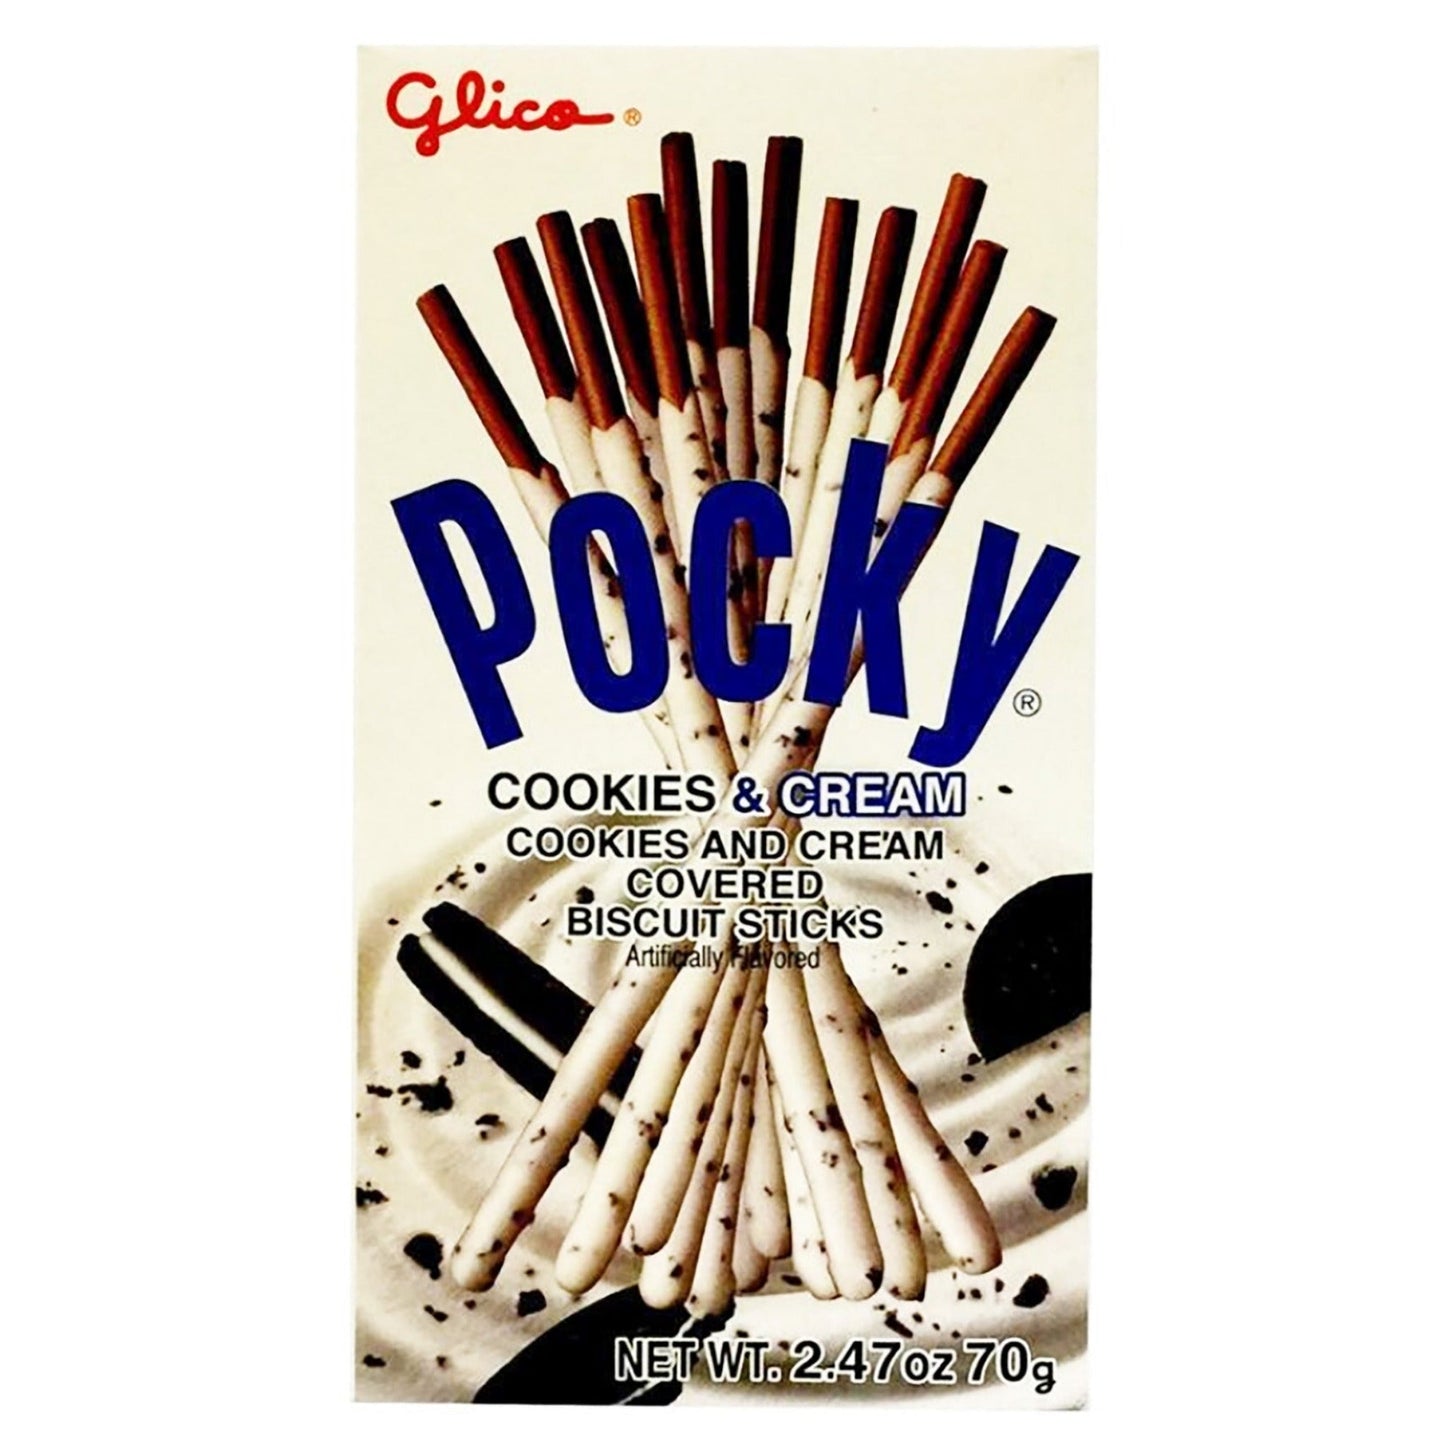 Front graphic image of Glico Pocky Biscuit Sticks - Cookies & Cream 2.47oz